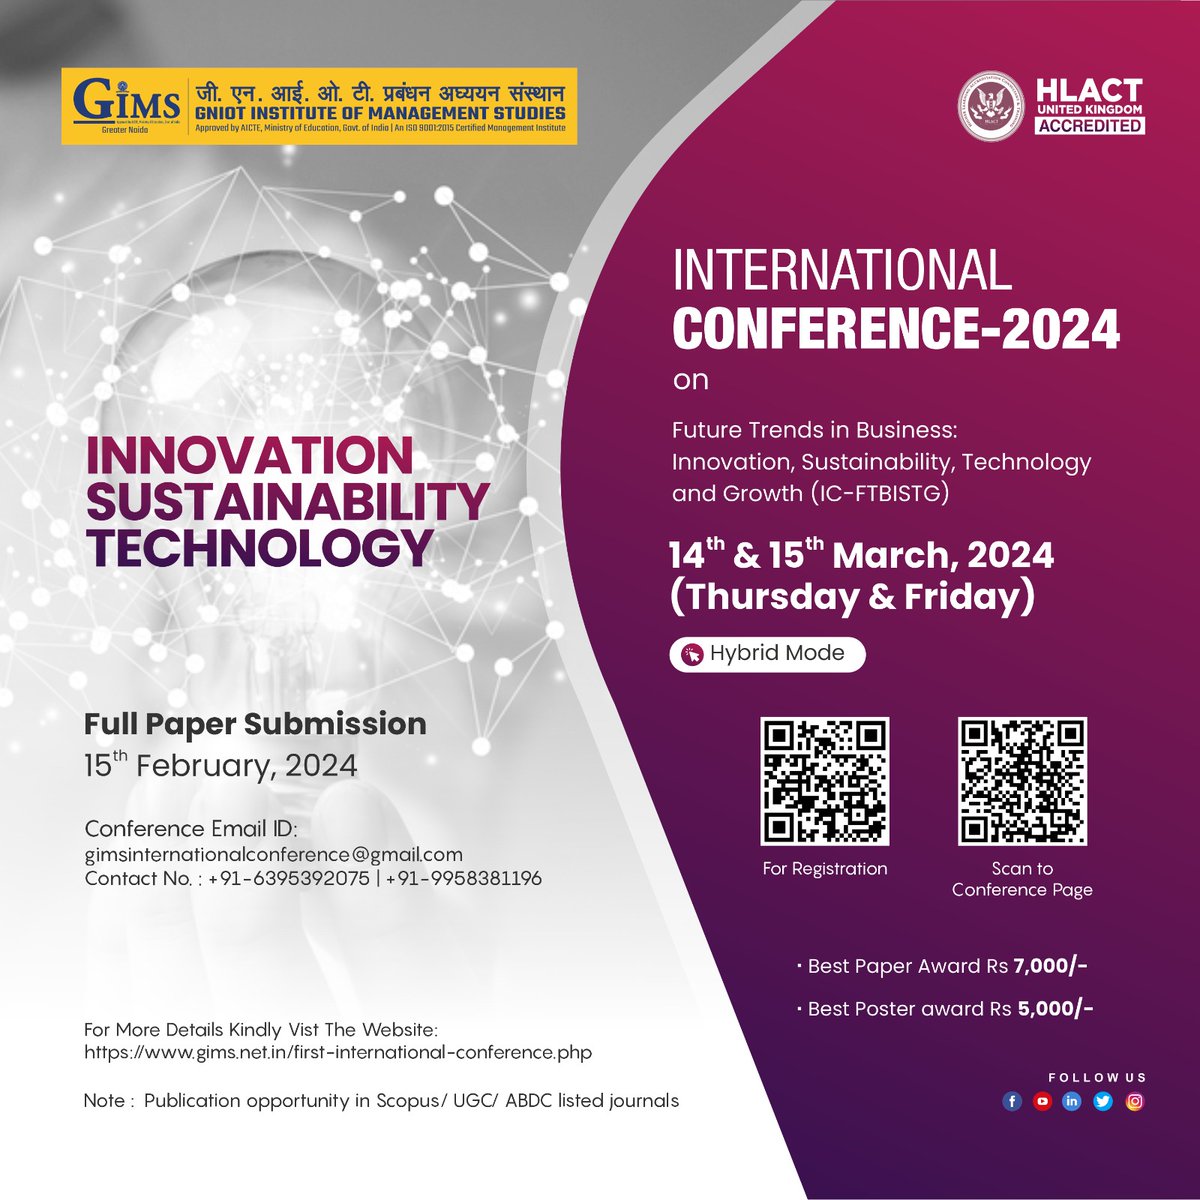 GIMS, Greater Noida hosts a two-day international conference on innovation, sustainability, technology, and growth, offering publication opportunities and awards.

#Gims #GreaterNoida #GIMSians #Innovation #Sustainability #Technology #IdeatoExecution #InternationalConference2024